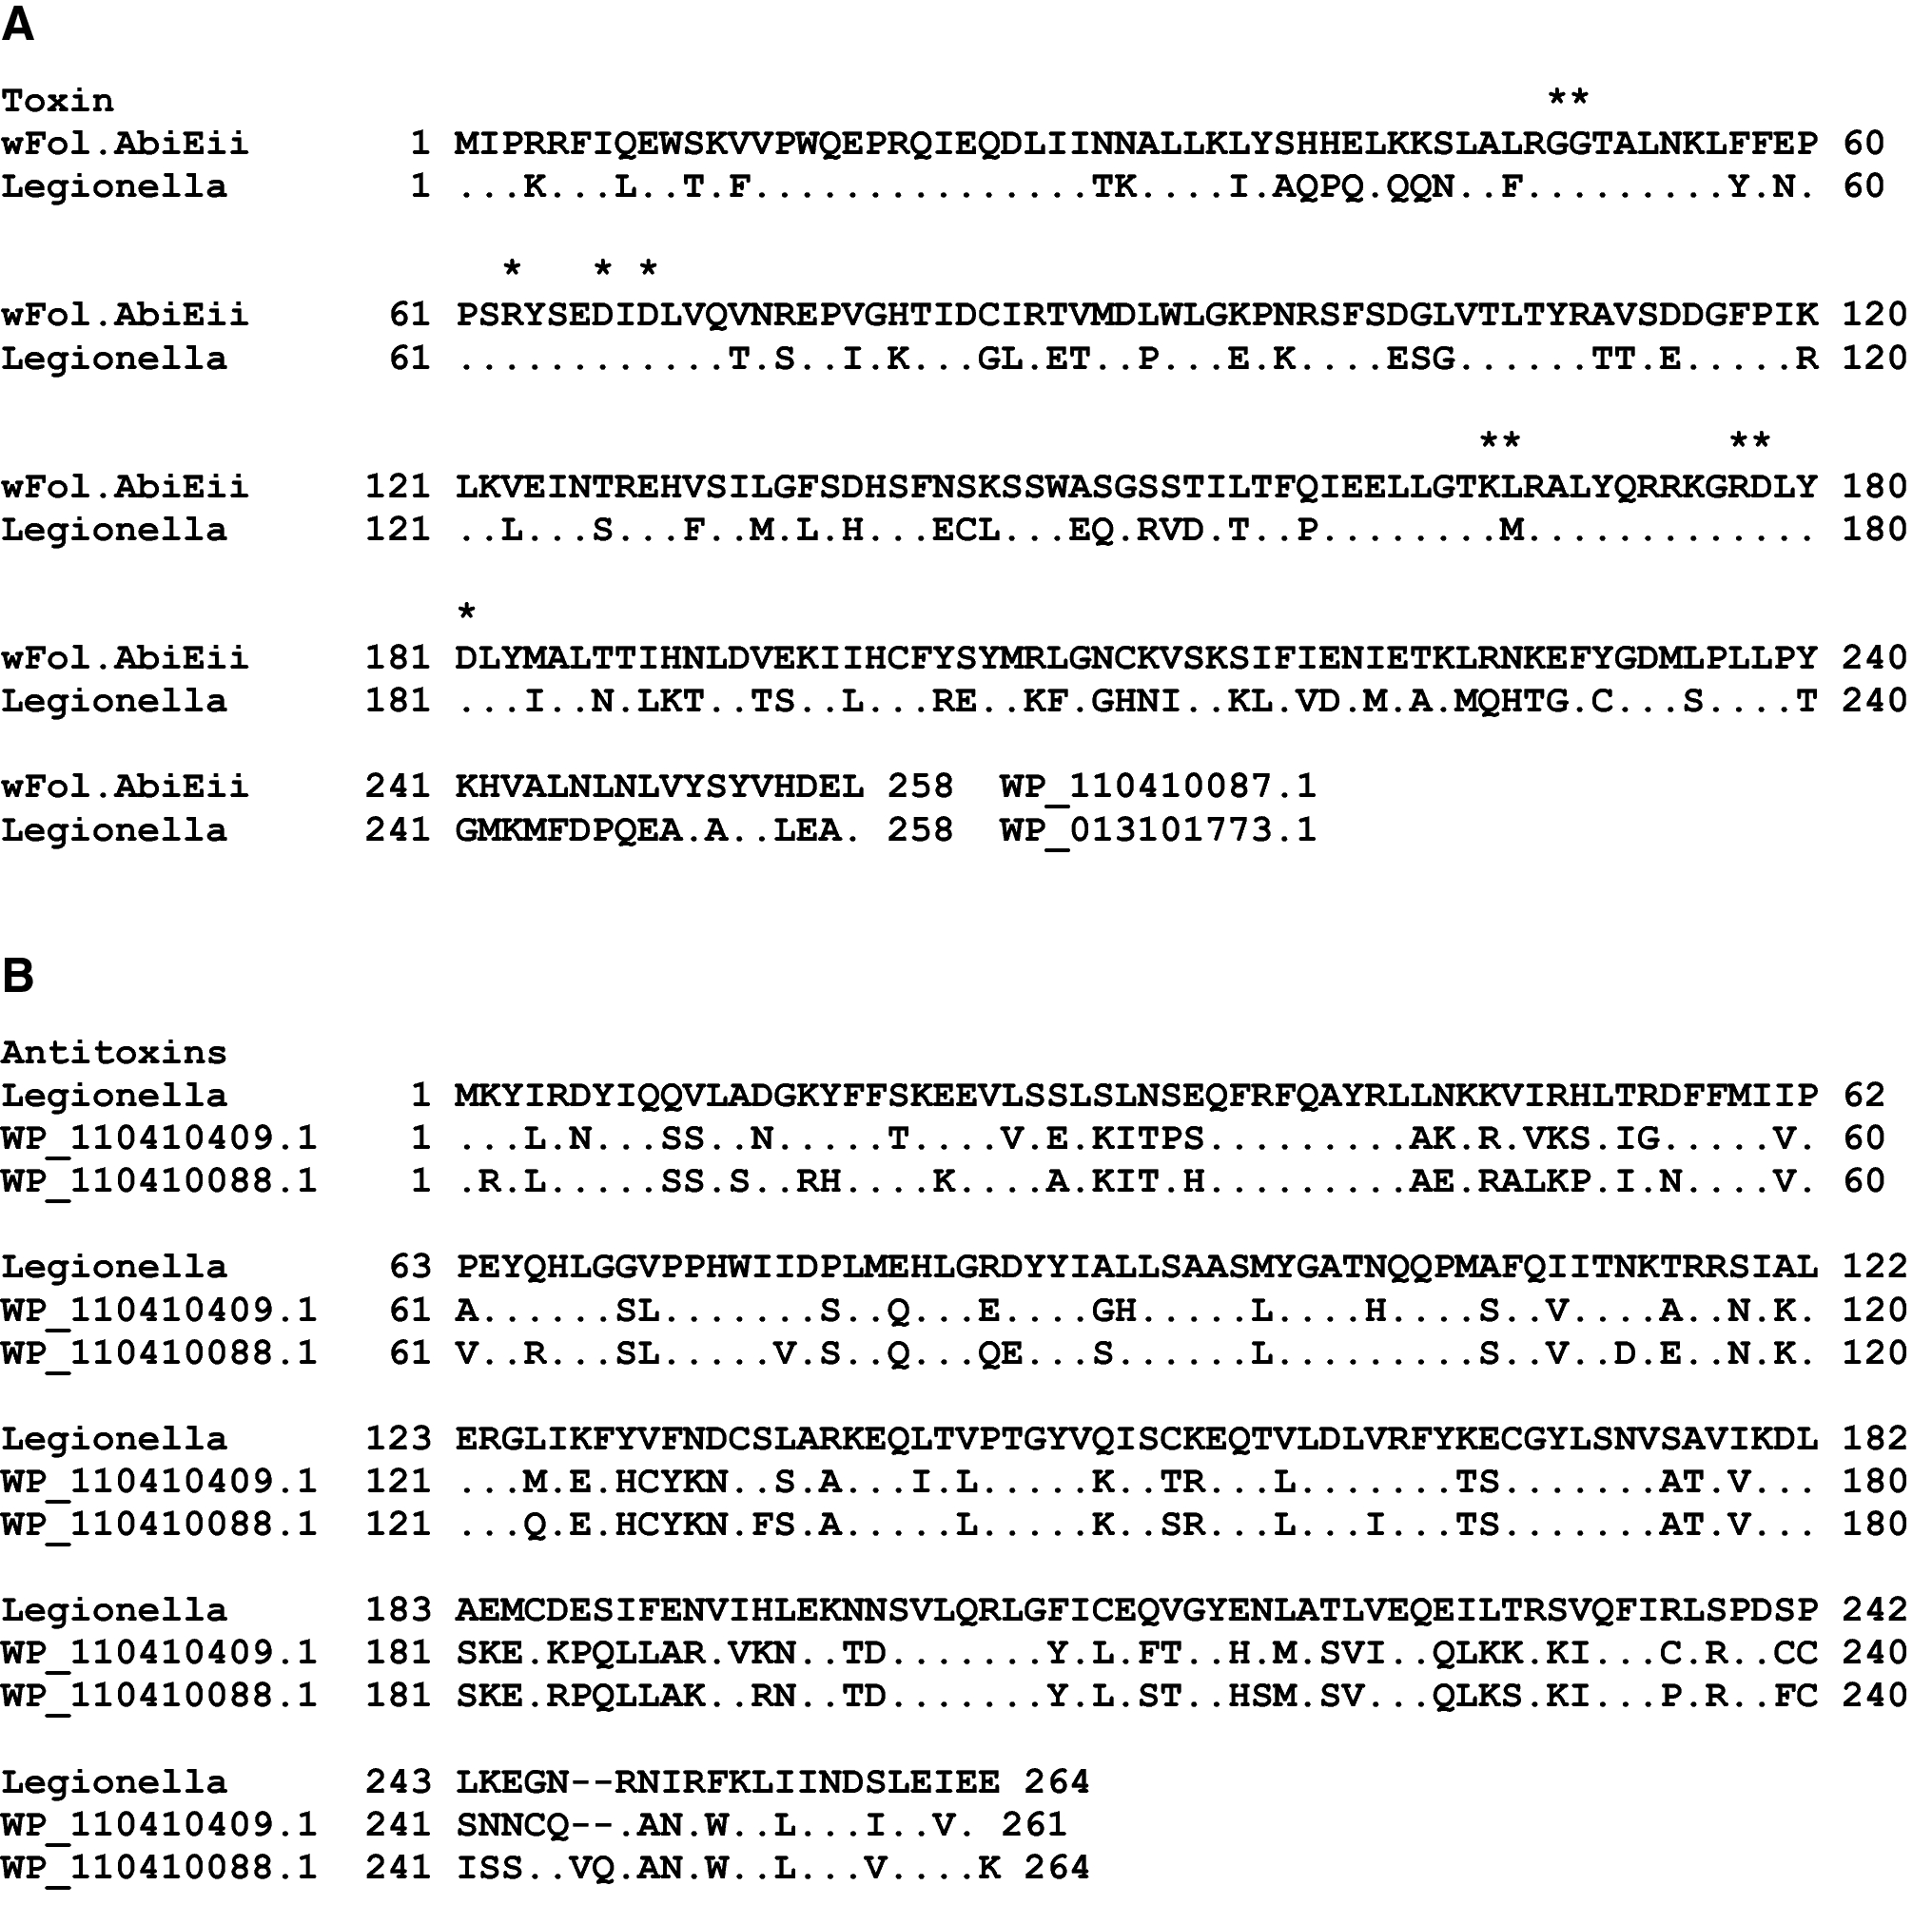 Figure 10 Computational Evidence For Antitoxins Associated With Rele Pare Rata Fic And Abieii Family Toxins In Wolbachia Genomes Springerlink